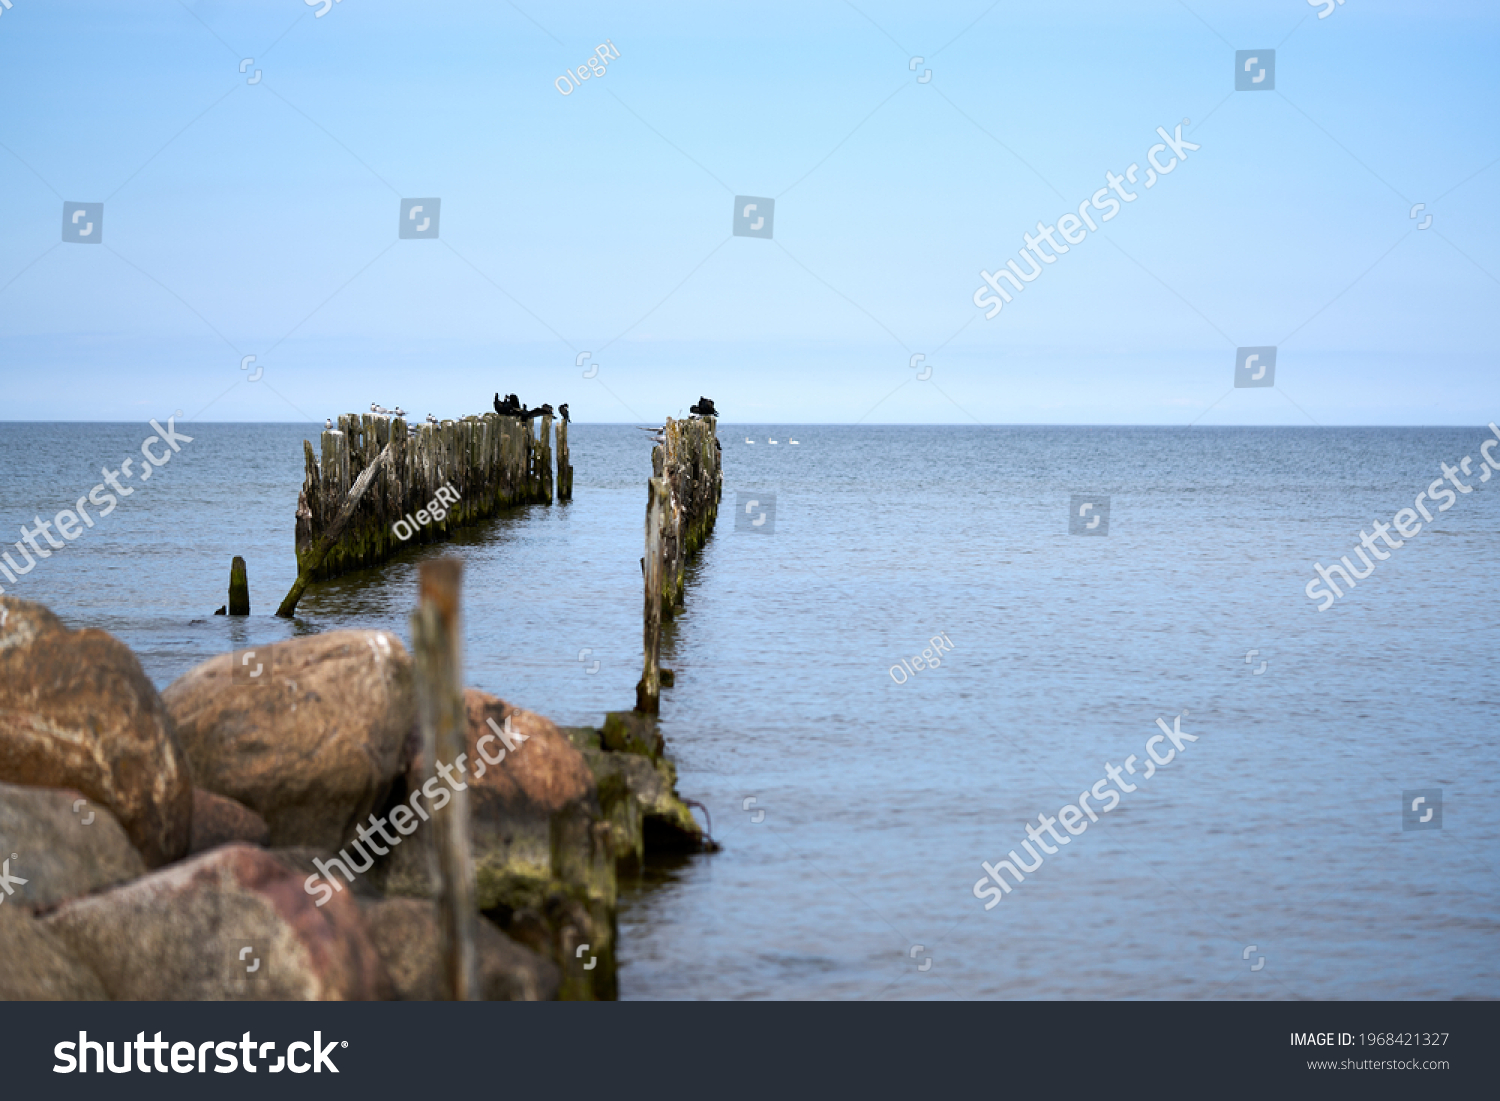 Battered wooden piles of the old pier in the Baltic Sea, leaving the horizon #1968421327